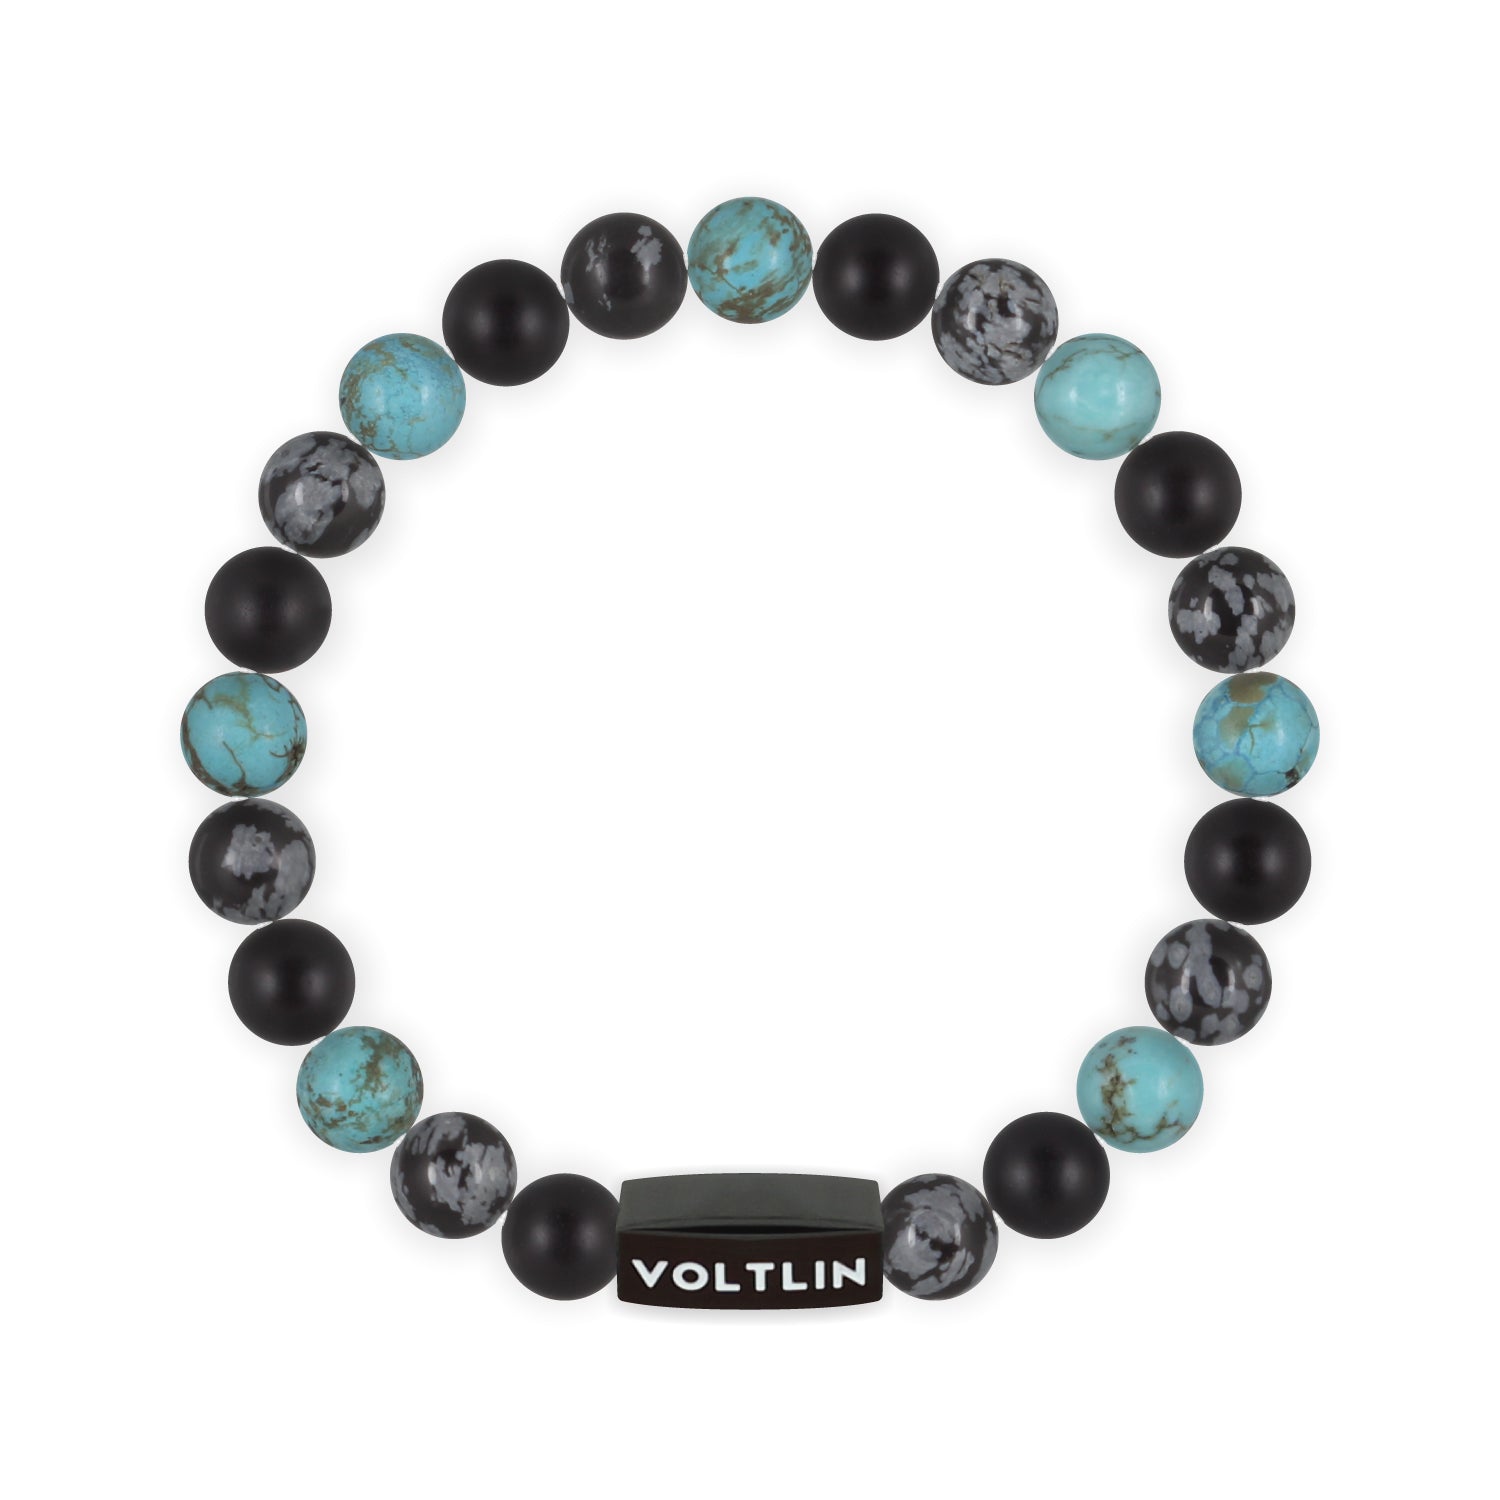 Front view of an 8mm Sagittarius Zodiac crystal beaded stretch bracelet with black stainless steel logo bead made by Voltlin